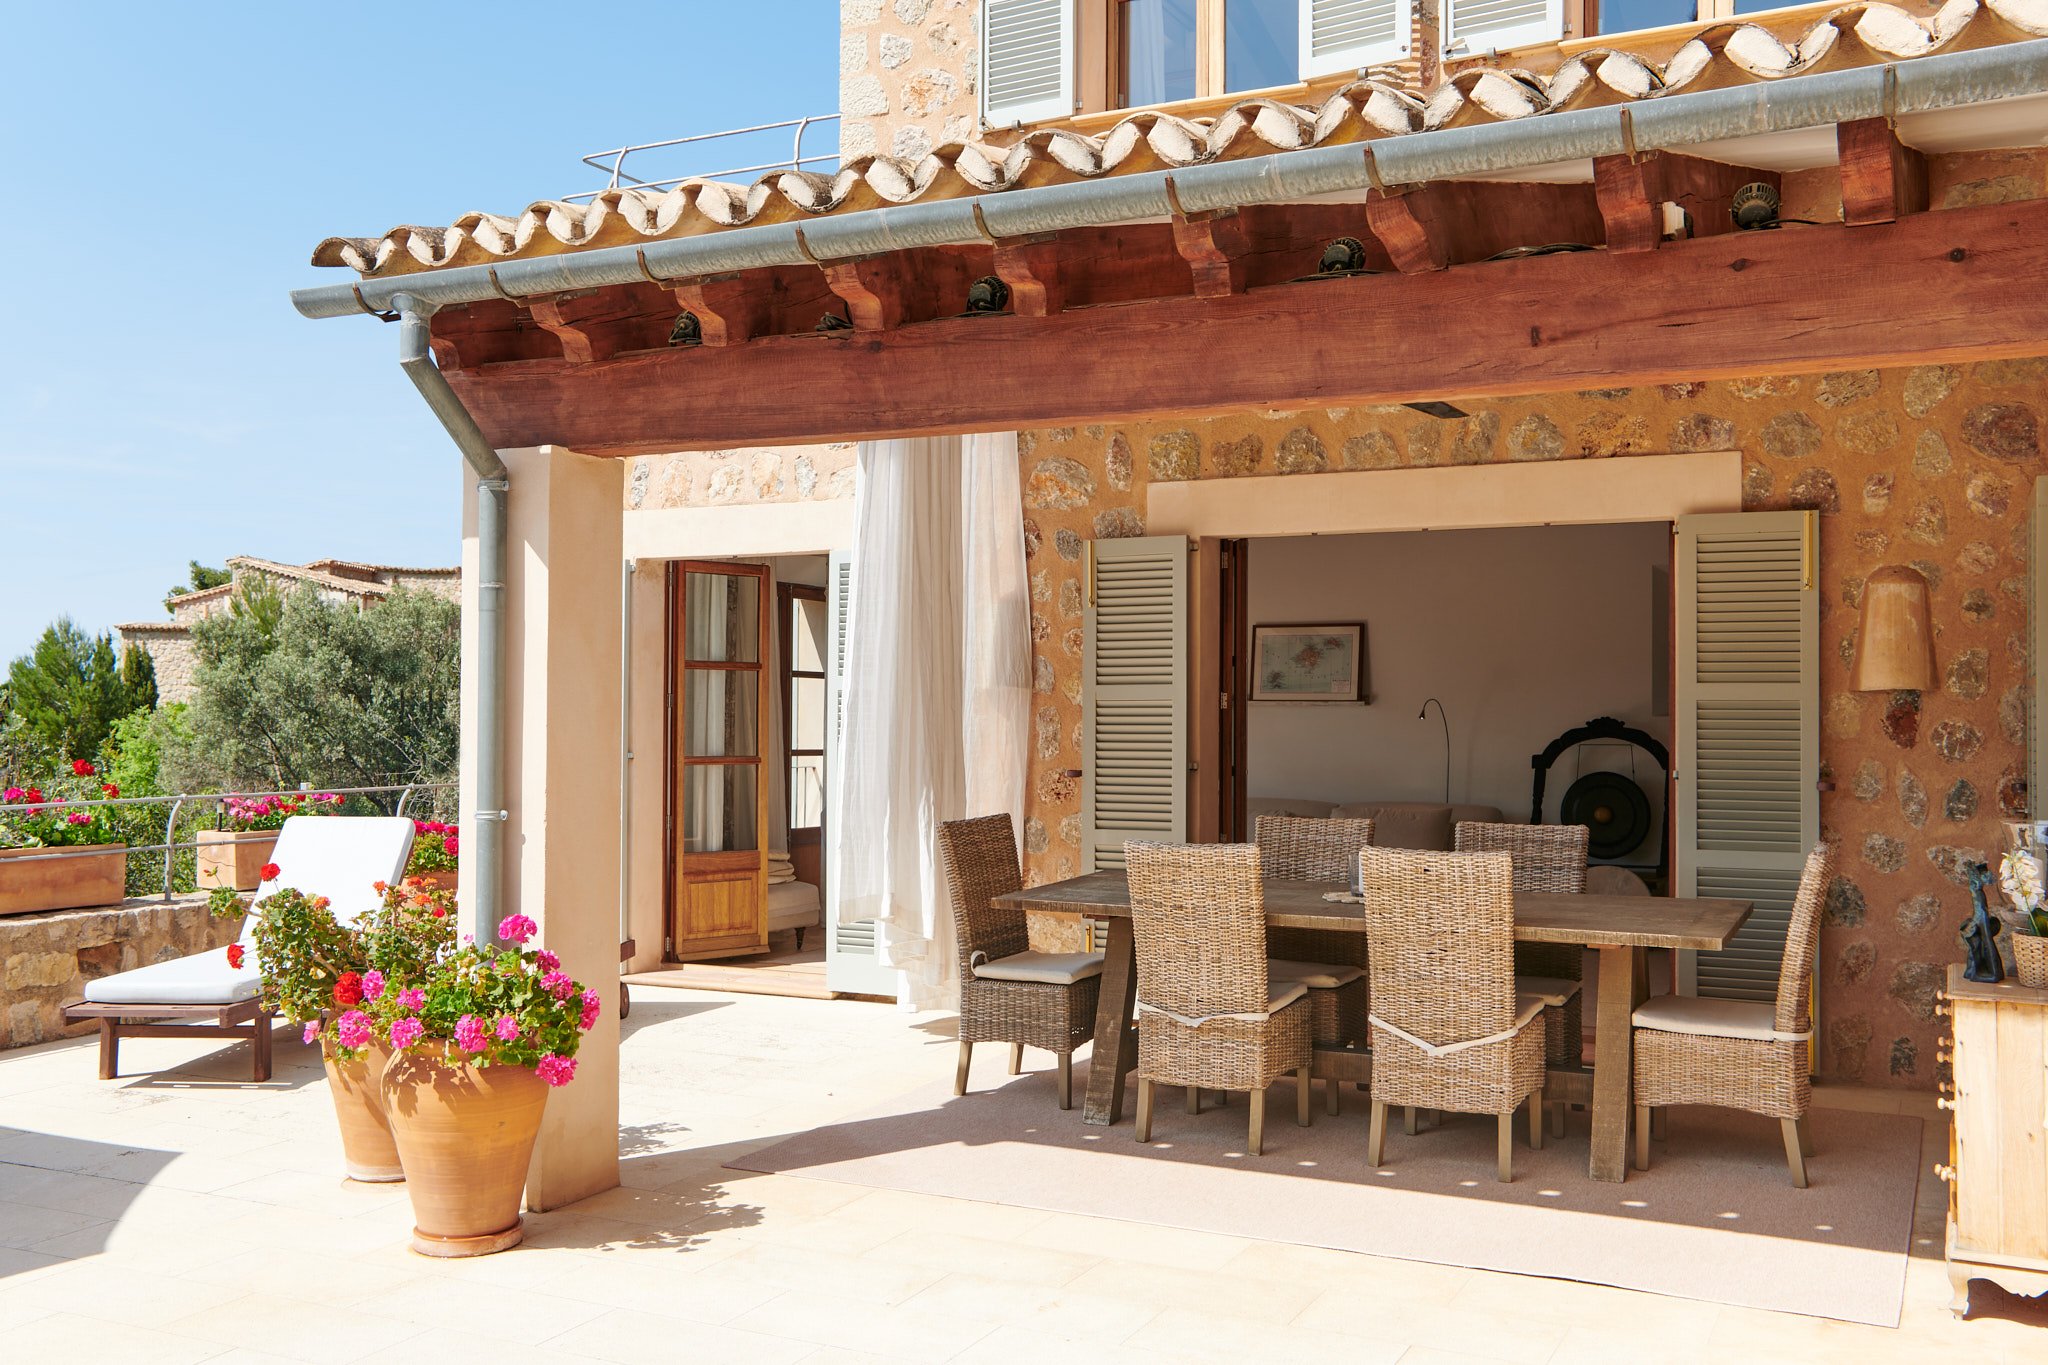 Francis York Casa Charlotte Dream Monthly Holiday Rental in Deia, Mallorca Available in September 9.jpg